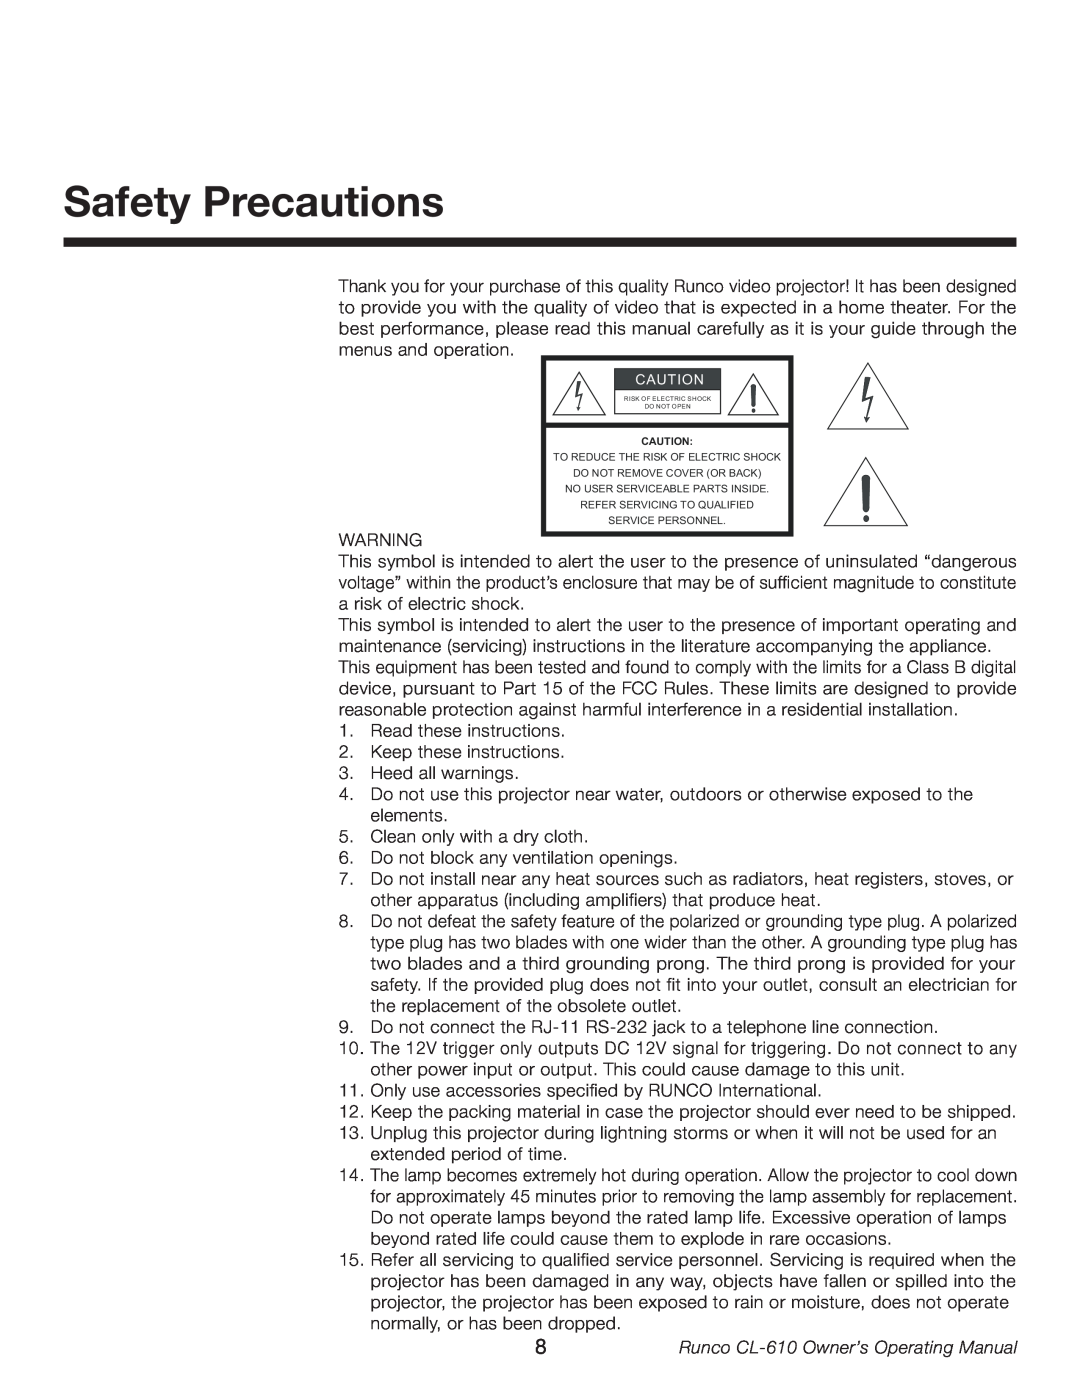 Runco CL-610LT manual Safety Precautions, Runco CL-610 Owner’s Operating Manual 